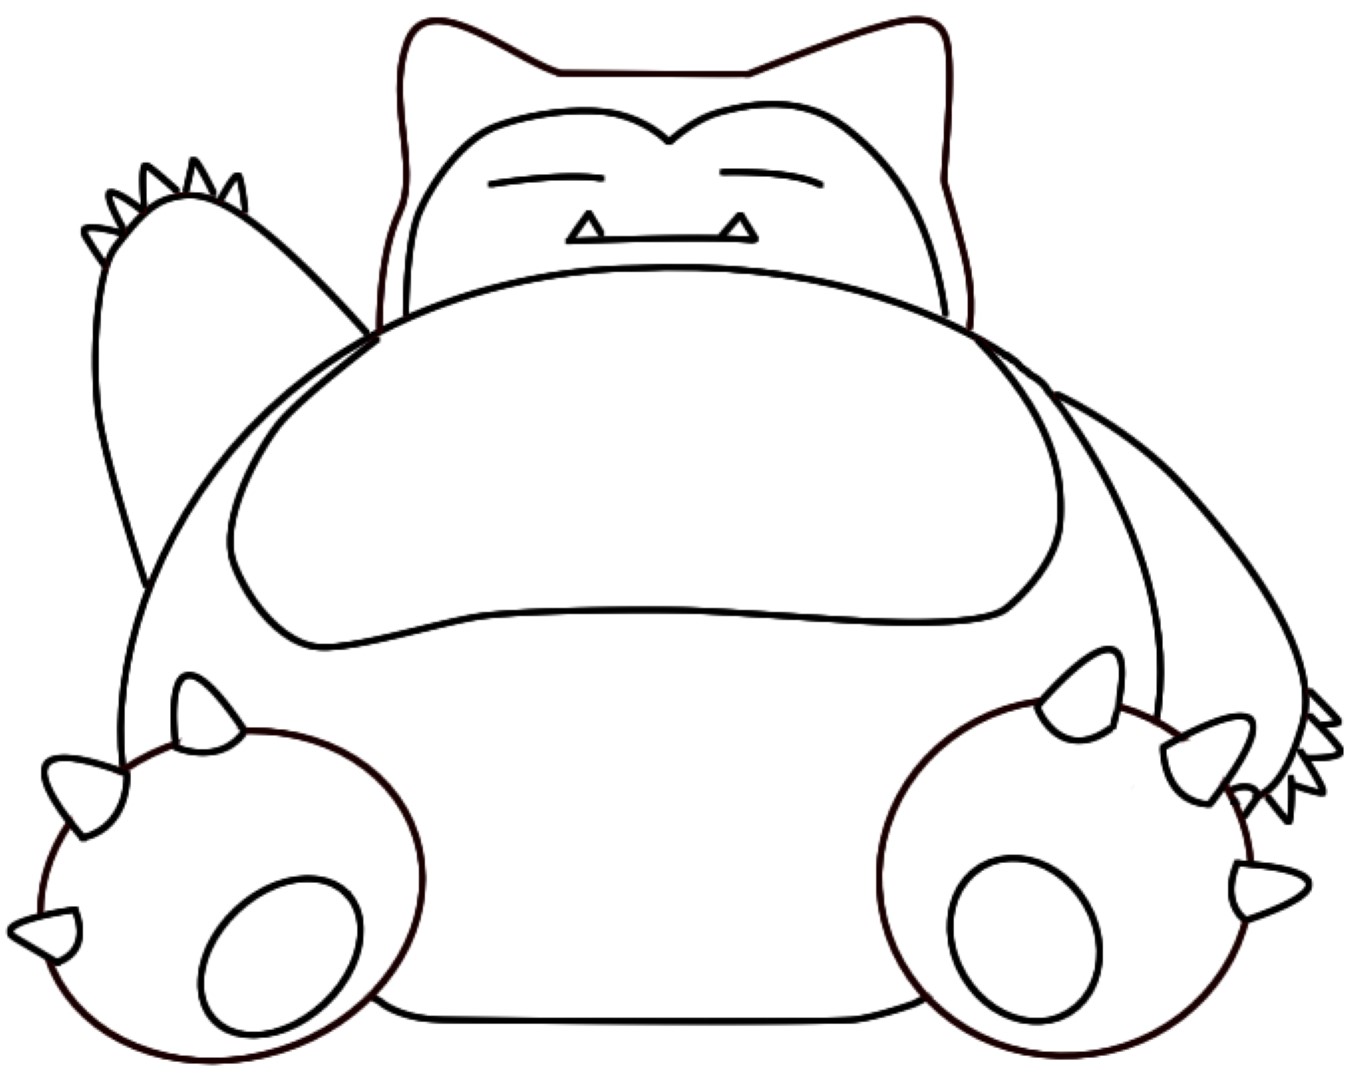 1352x1080 Snorlax Pokemon Colouring Pages.